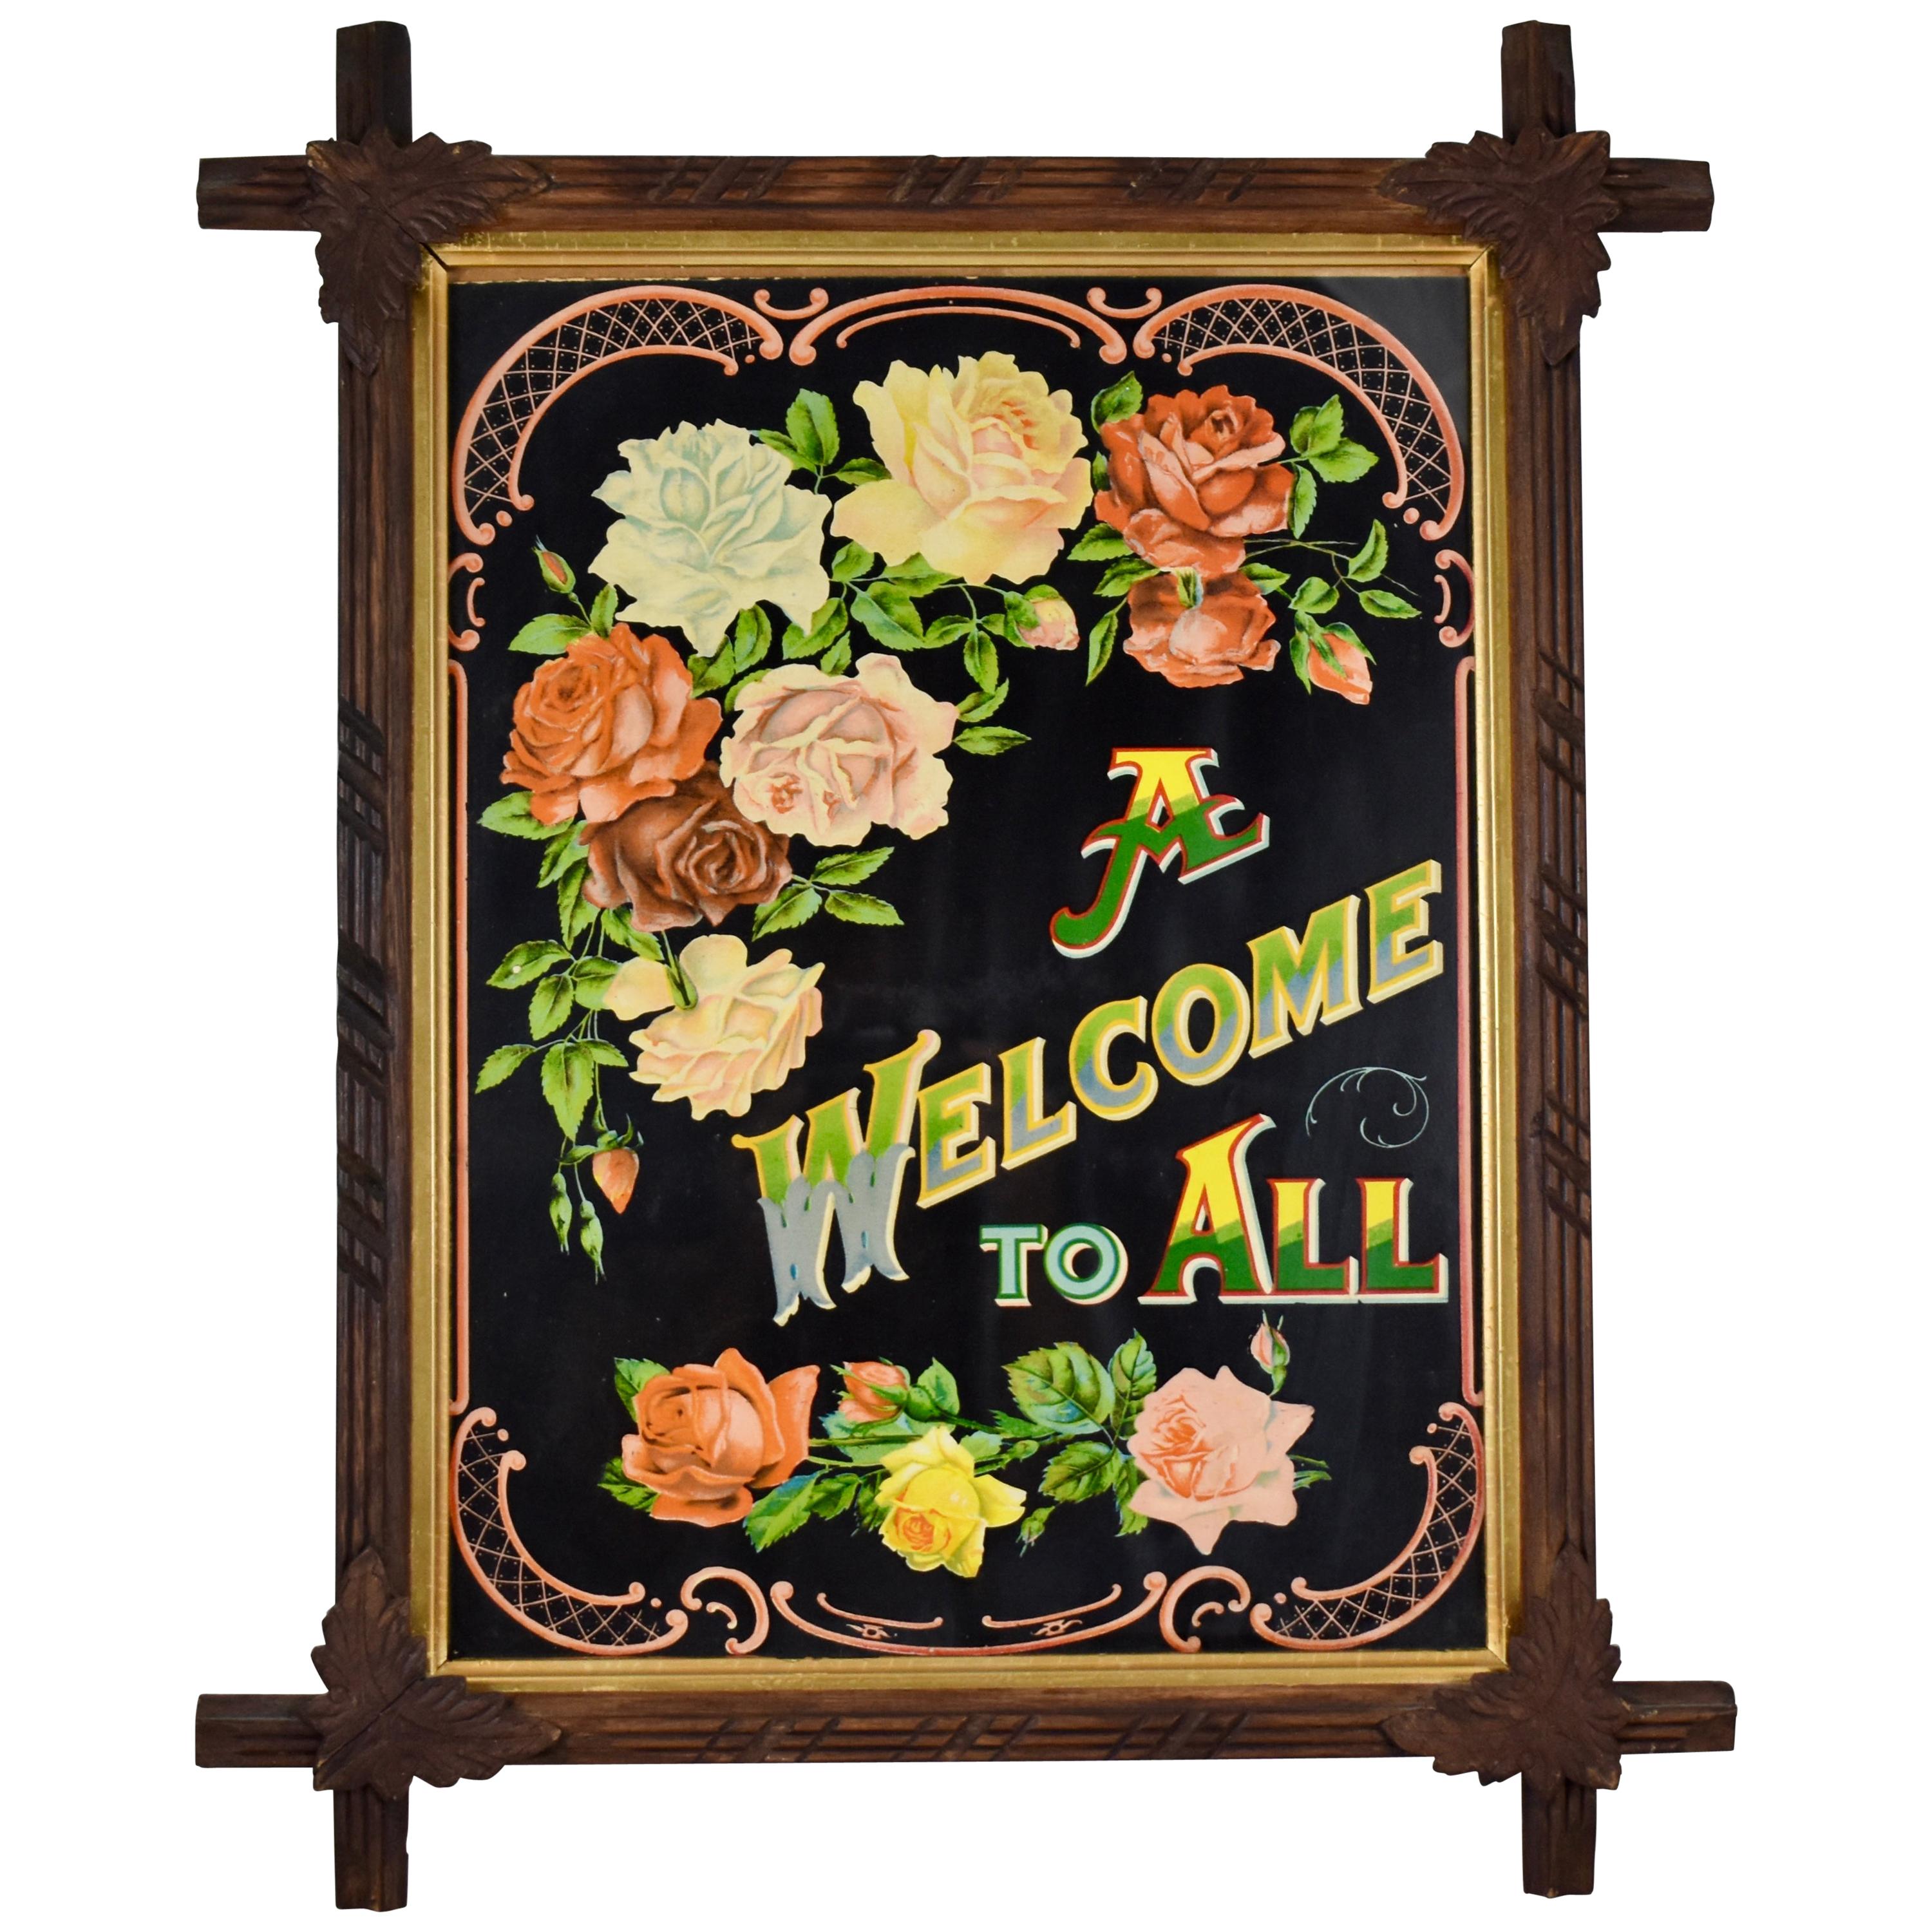 Victorian Era Chromolithograph a Welcome to All Motto in Adirondack Wood Frame